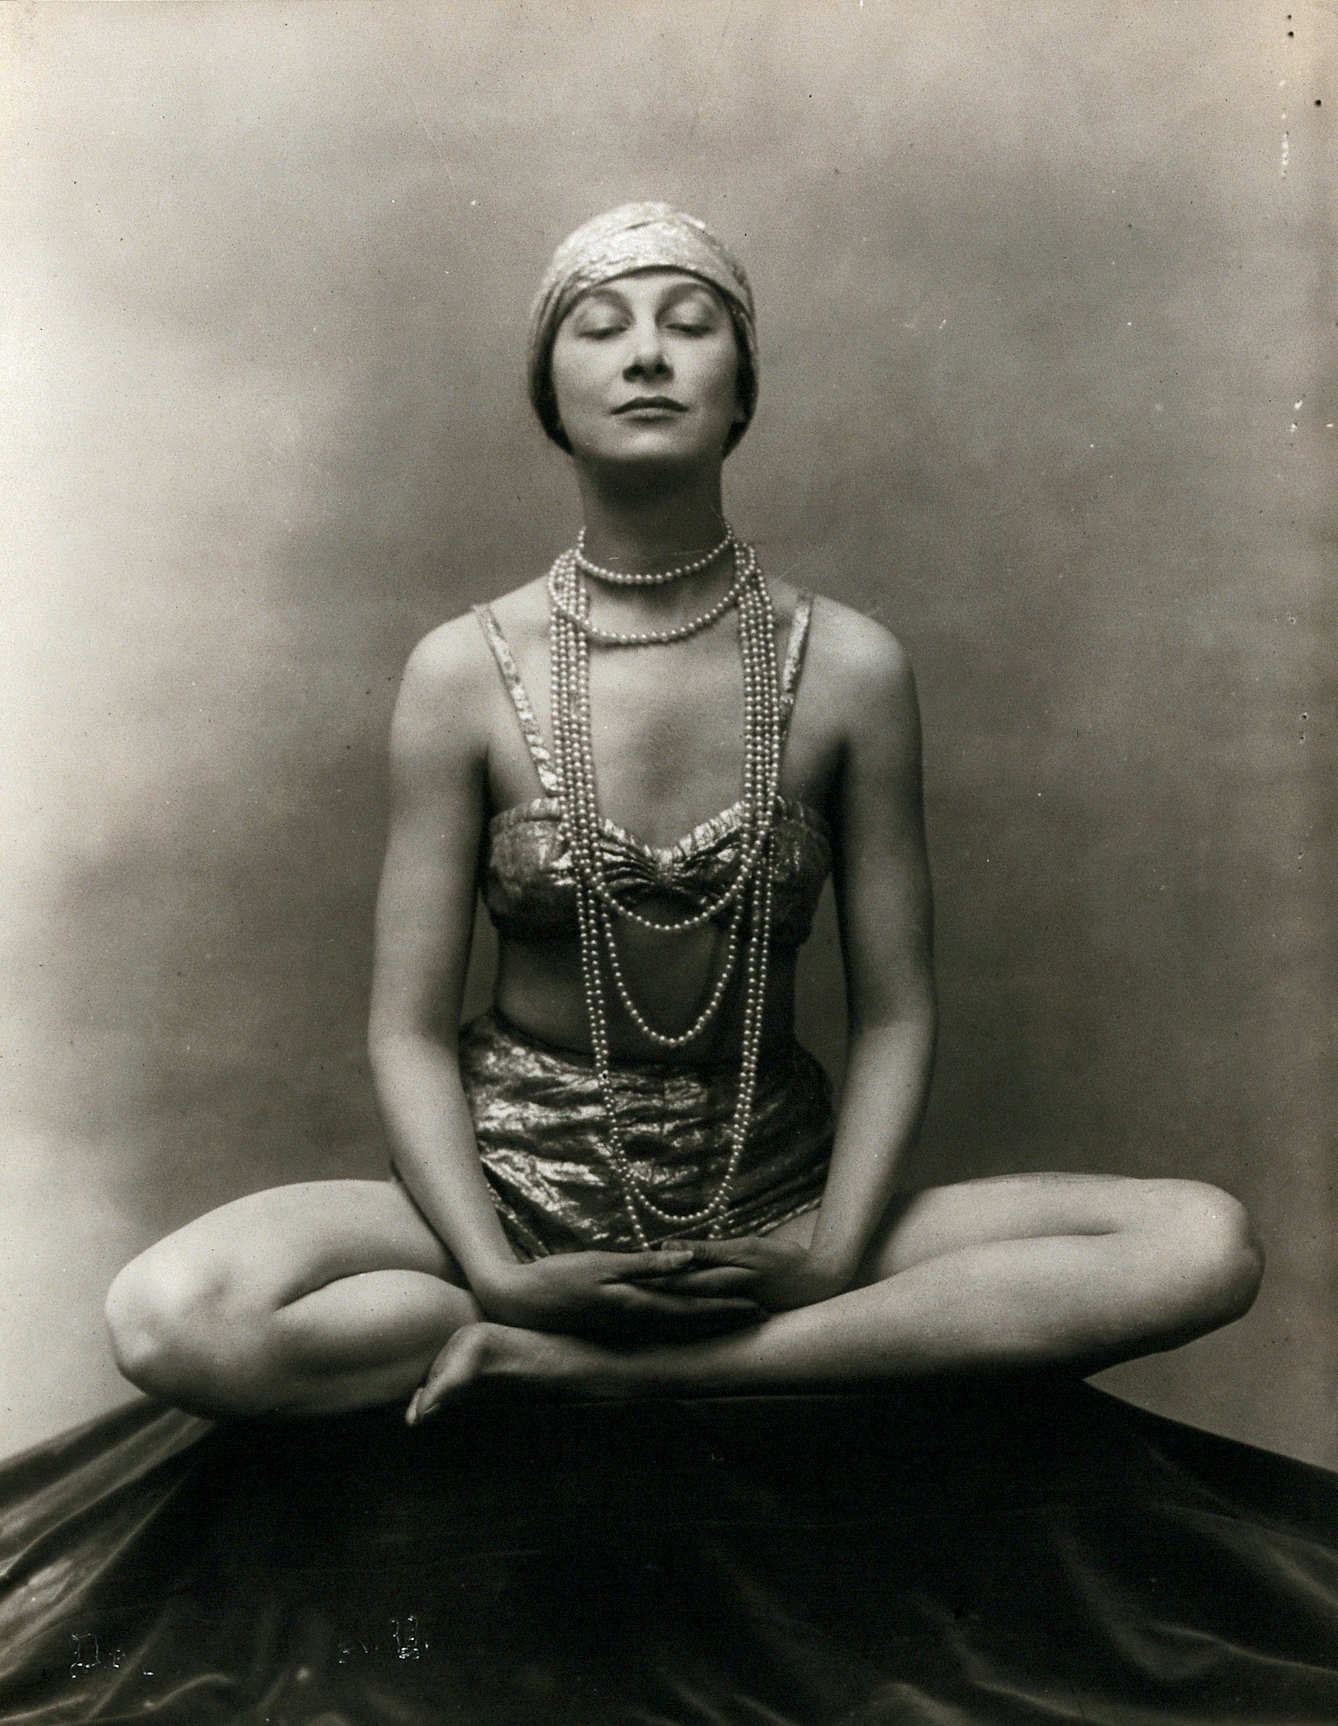 A woman in 1920s dres seated in the Buddha Pose